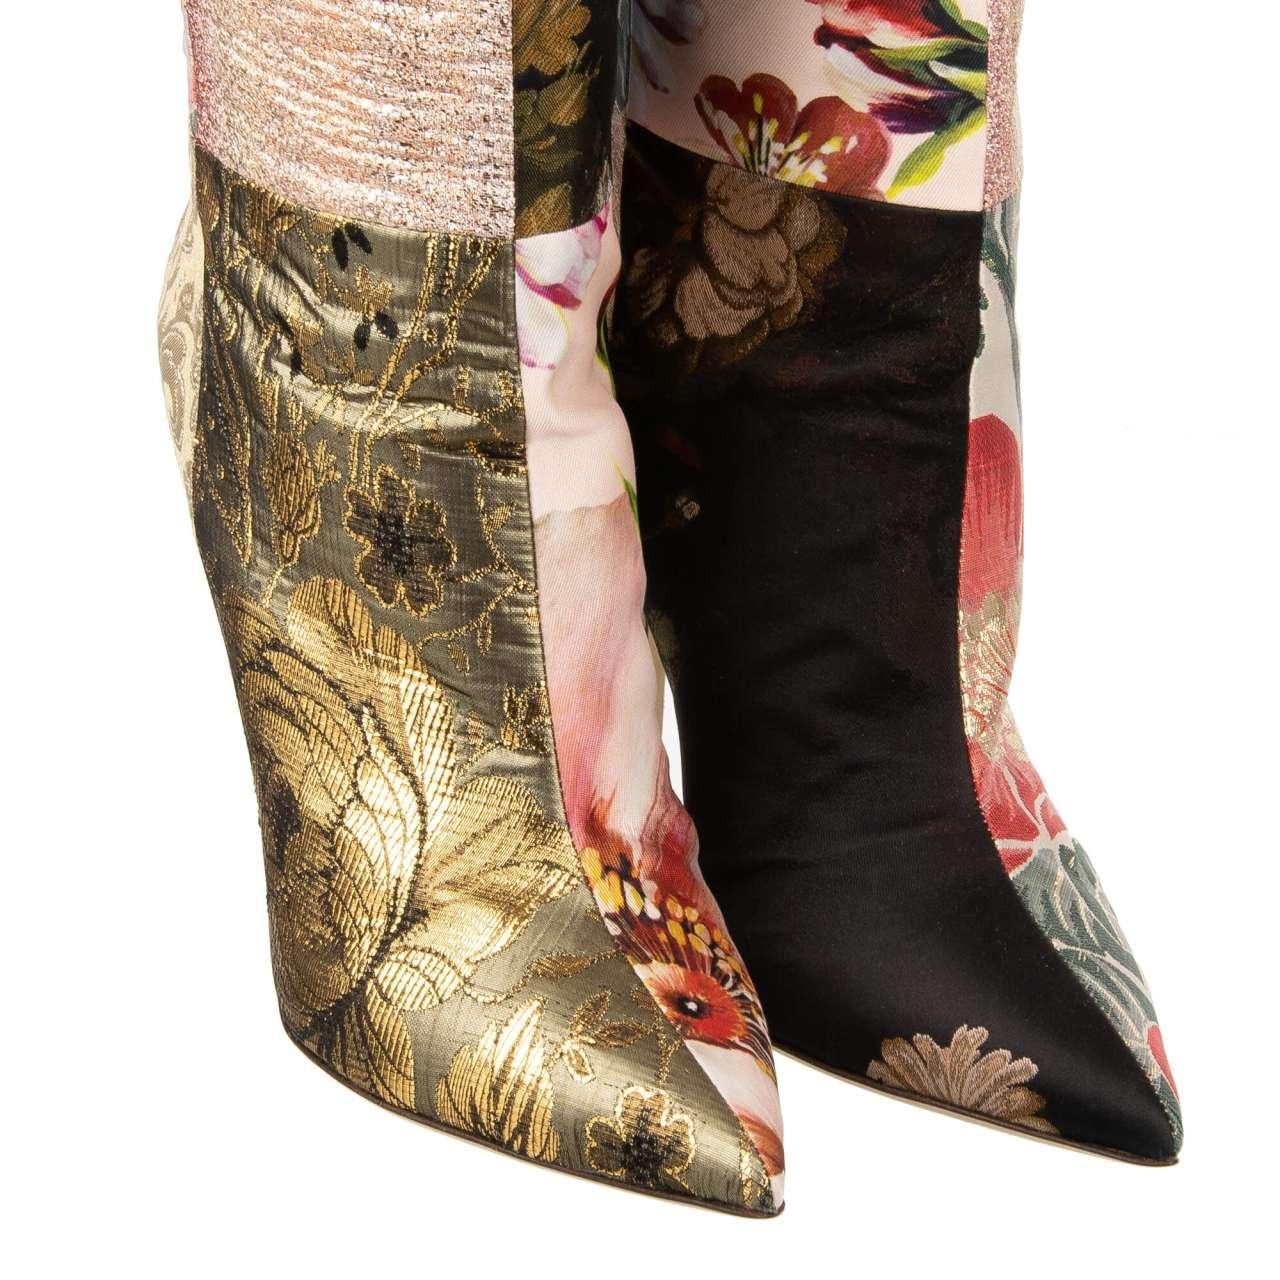 Dolce & Gabbana Flower Brocade Patchwork Boots CARDINALE Gold Pink 40.5 10.5 For Sale 2